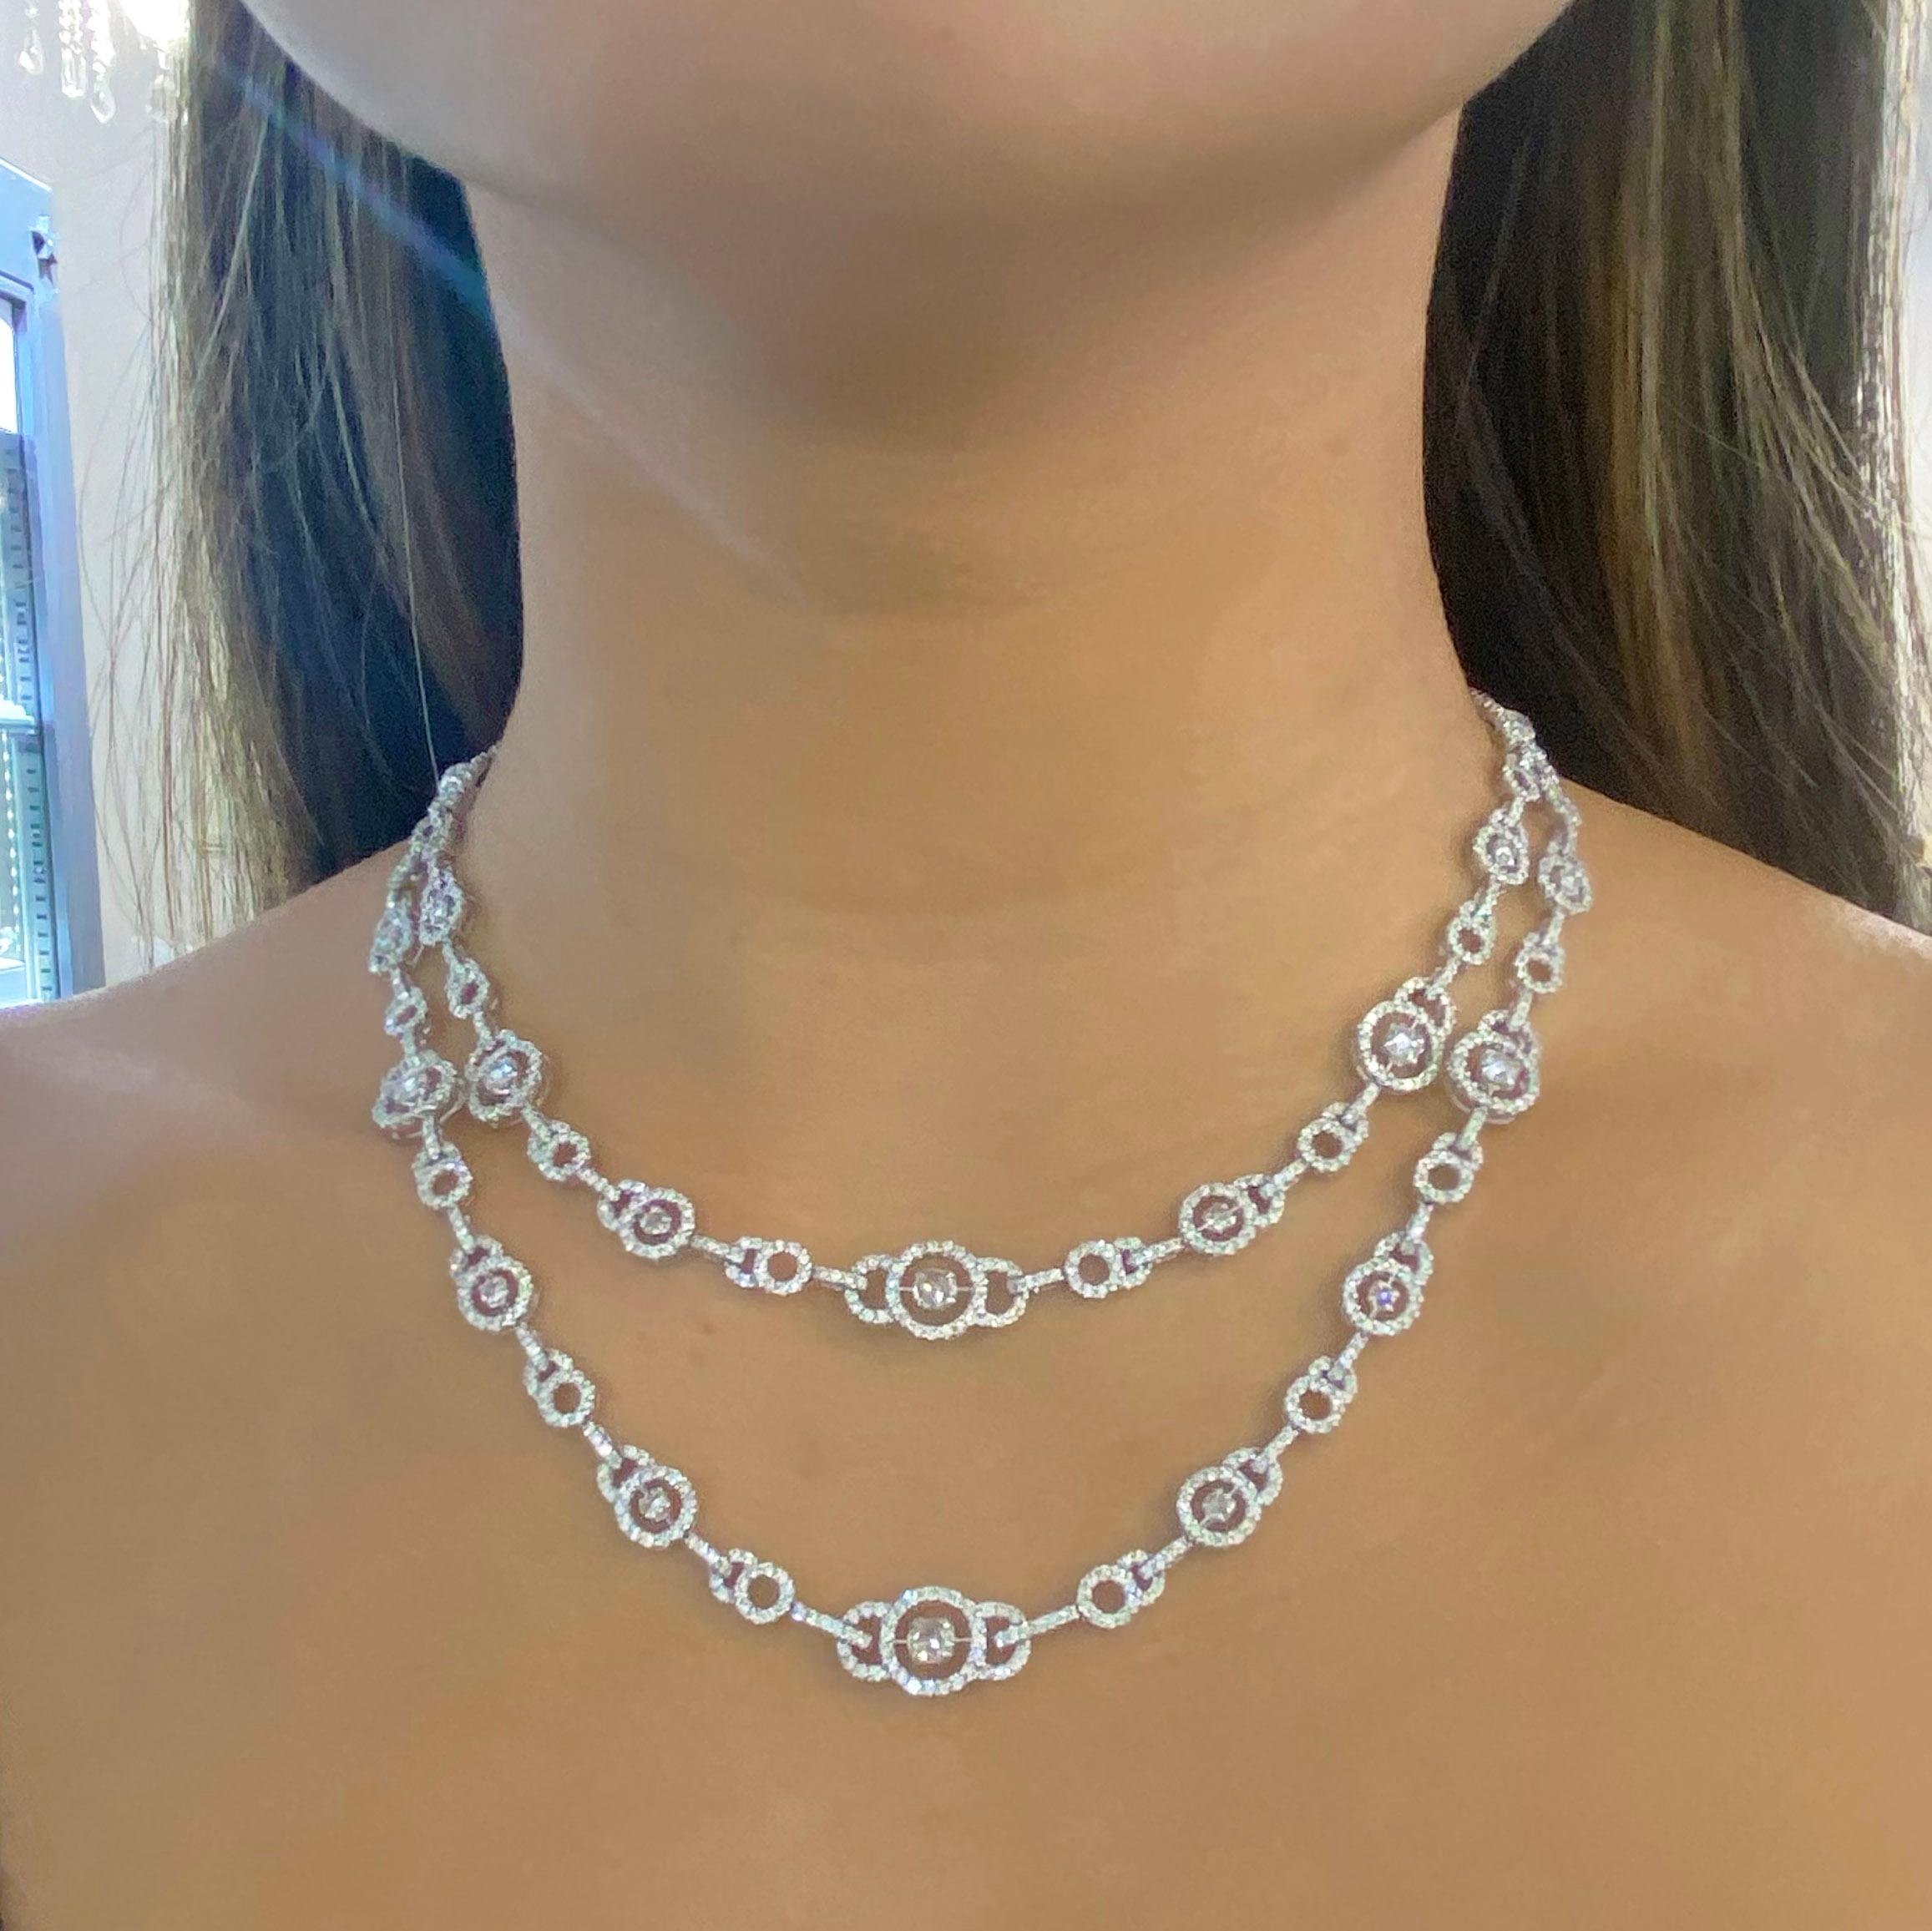 This iconic necklace is an original that has over 800 diamonds that have a total weight of over 10 carats. The necklace hangs perfectly on any neck size with sparkle from every direction! If you want people to notice you, this diamond necklace is